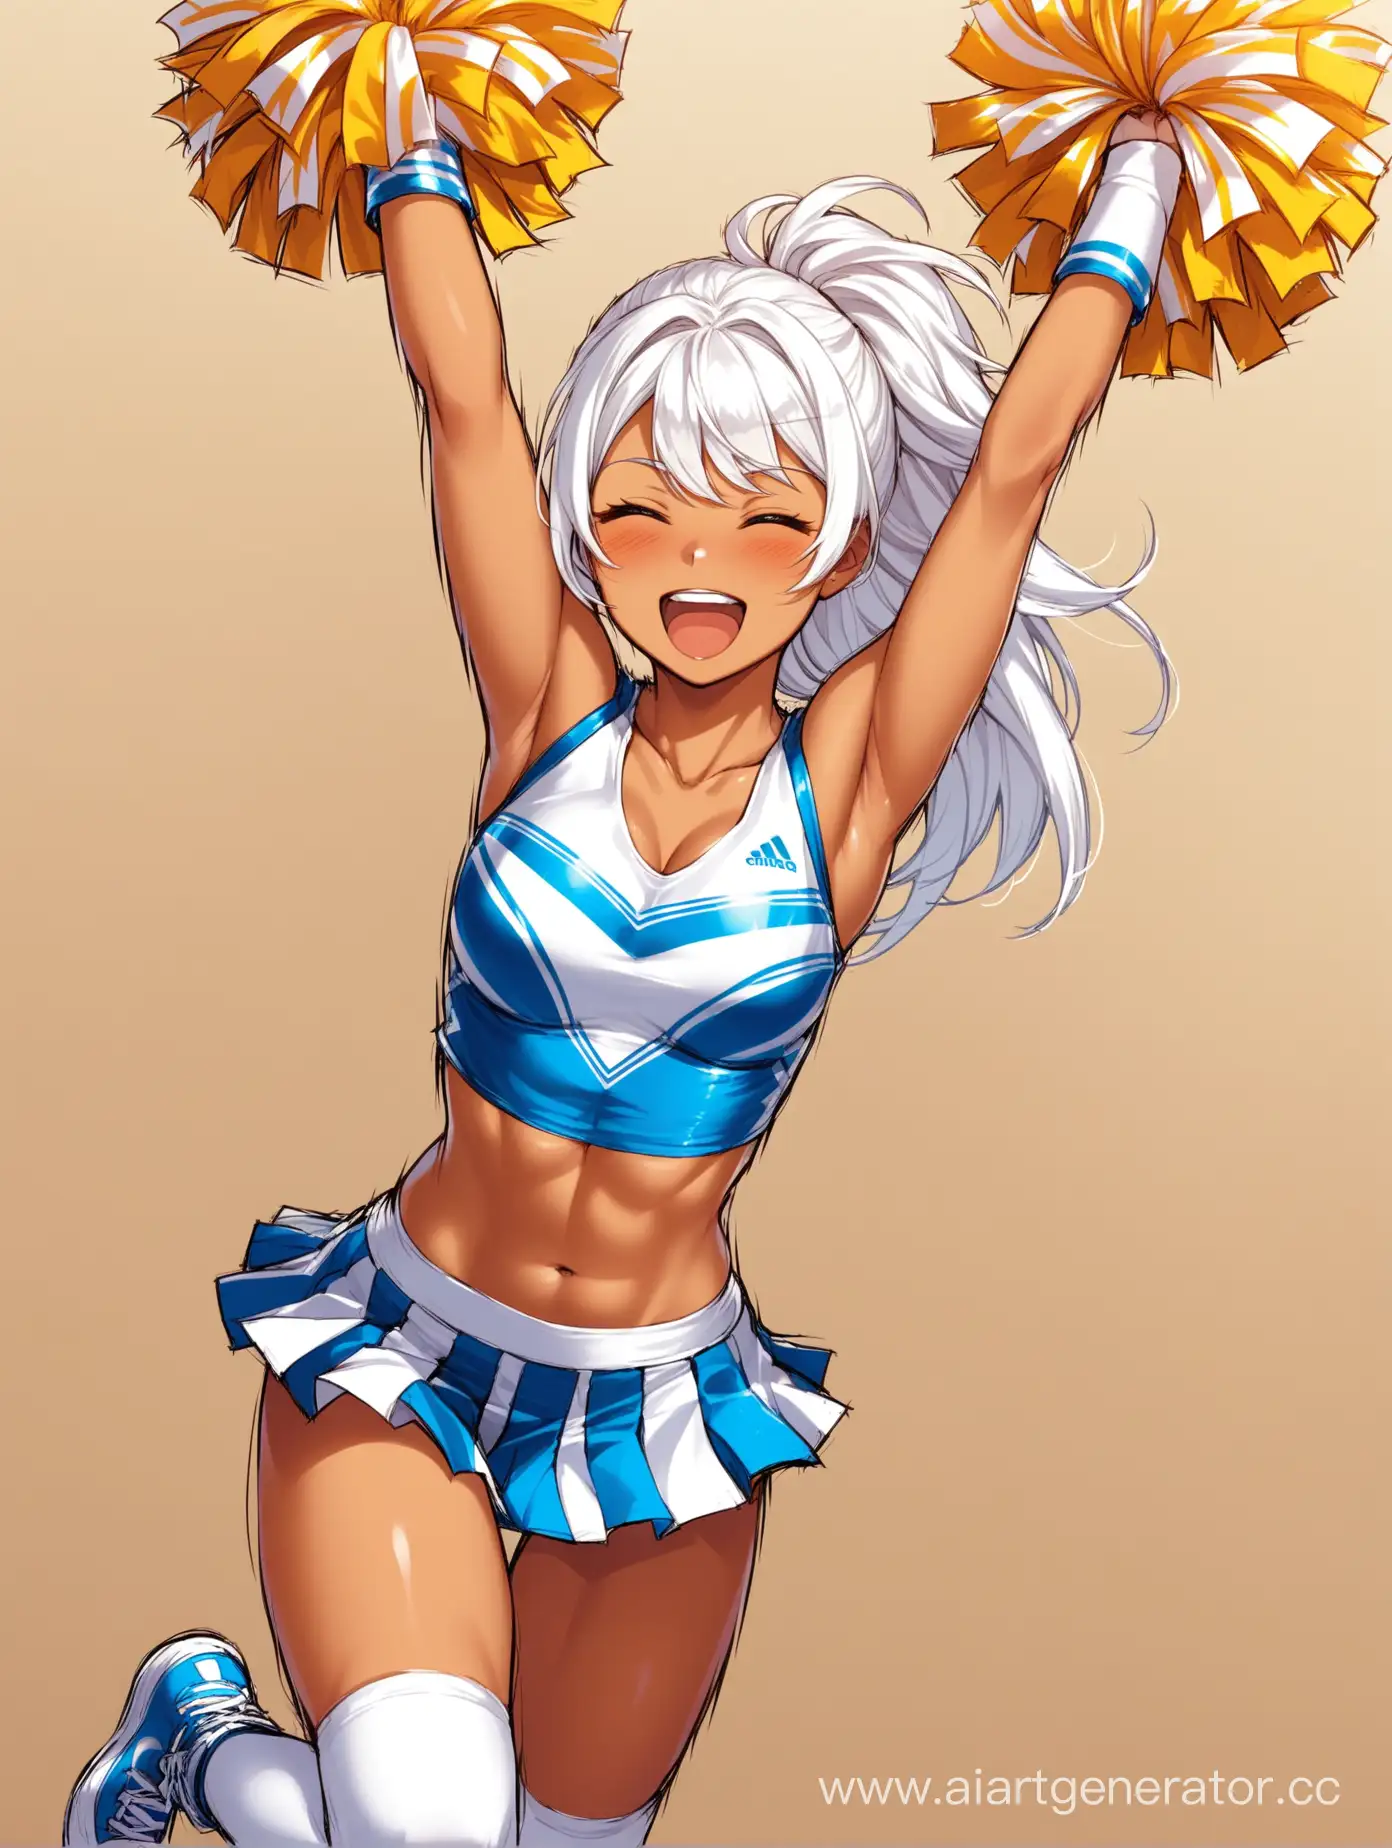 Tanned-Cheerleader-Fitness-Enthusiast-with-White-Hair-Enjoying-Parade-Celebration